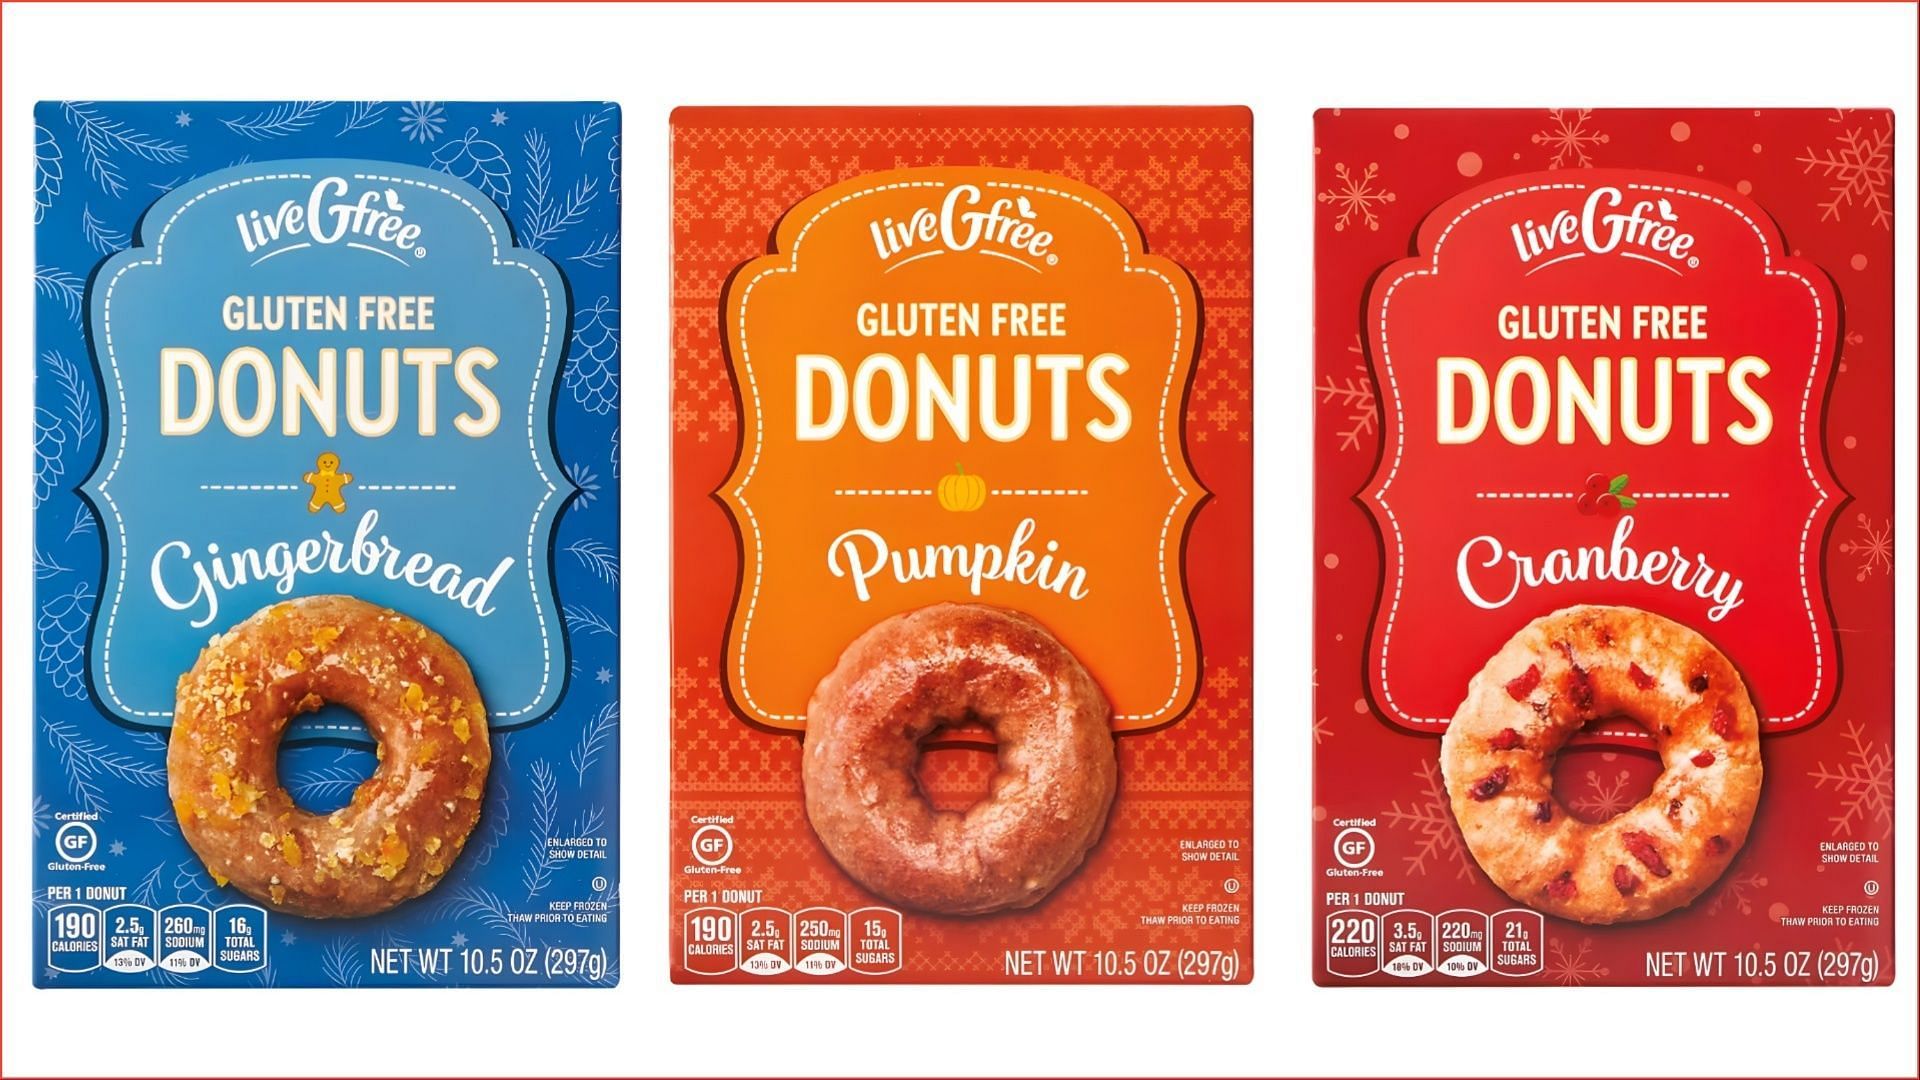 The gluten-free, LiveGfree donuts are priced at over $4.49 (Image via Aldi)